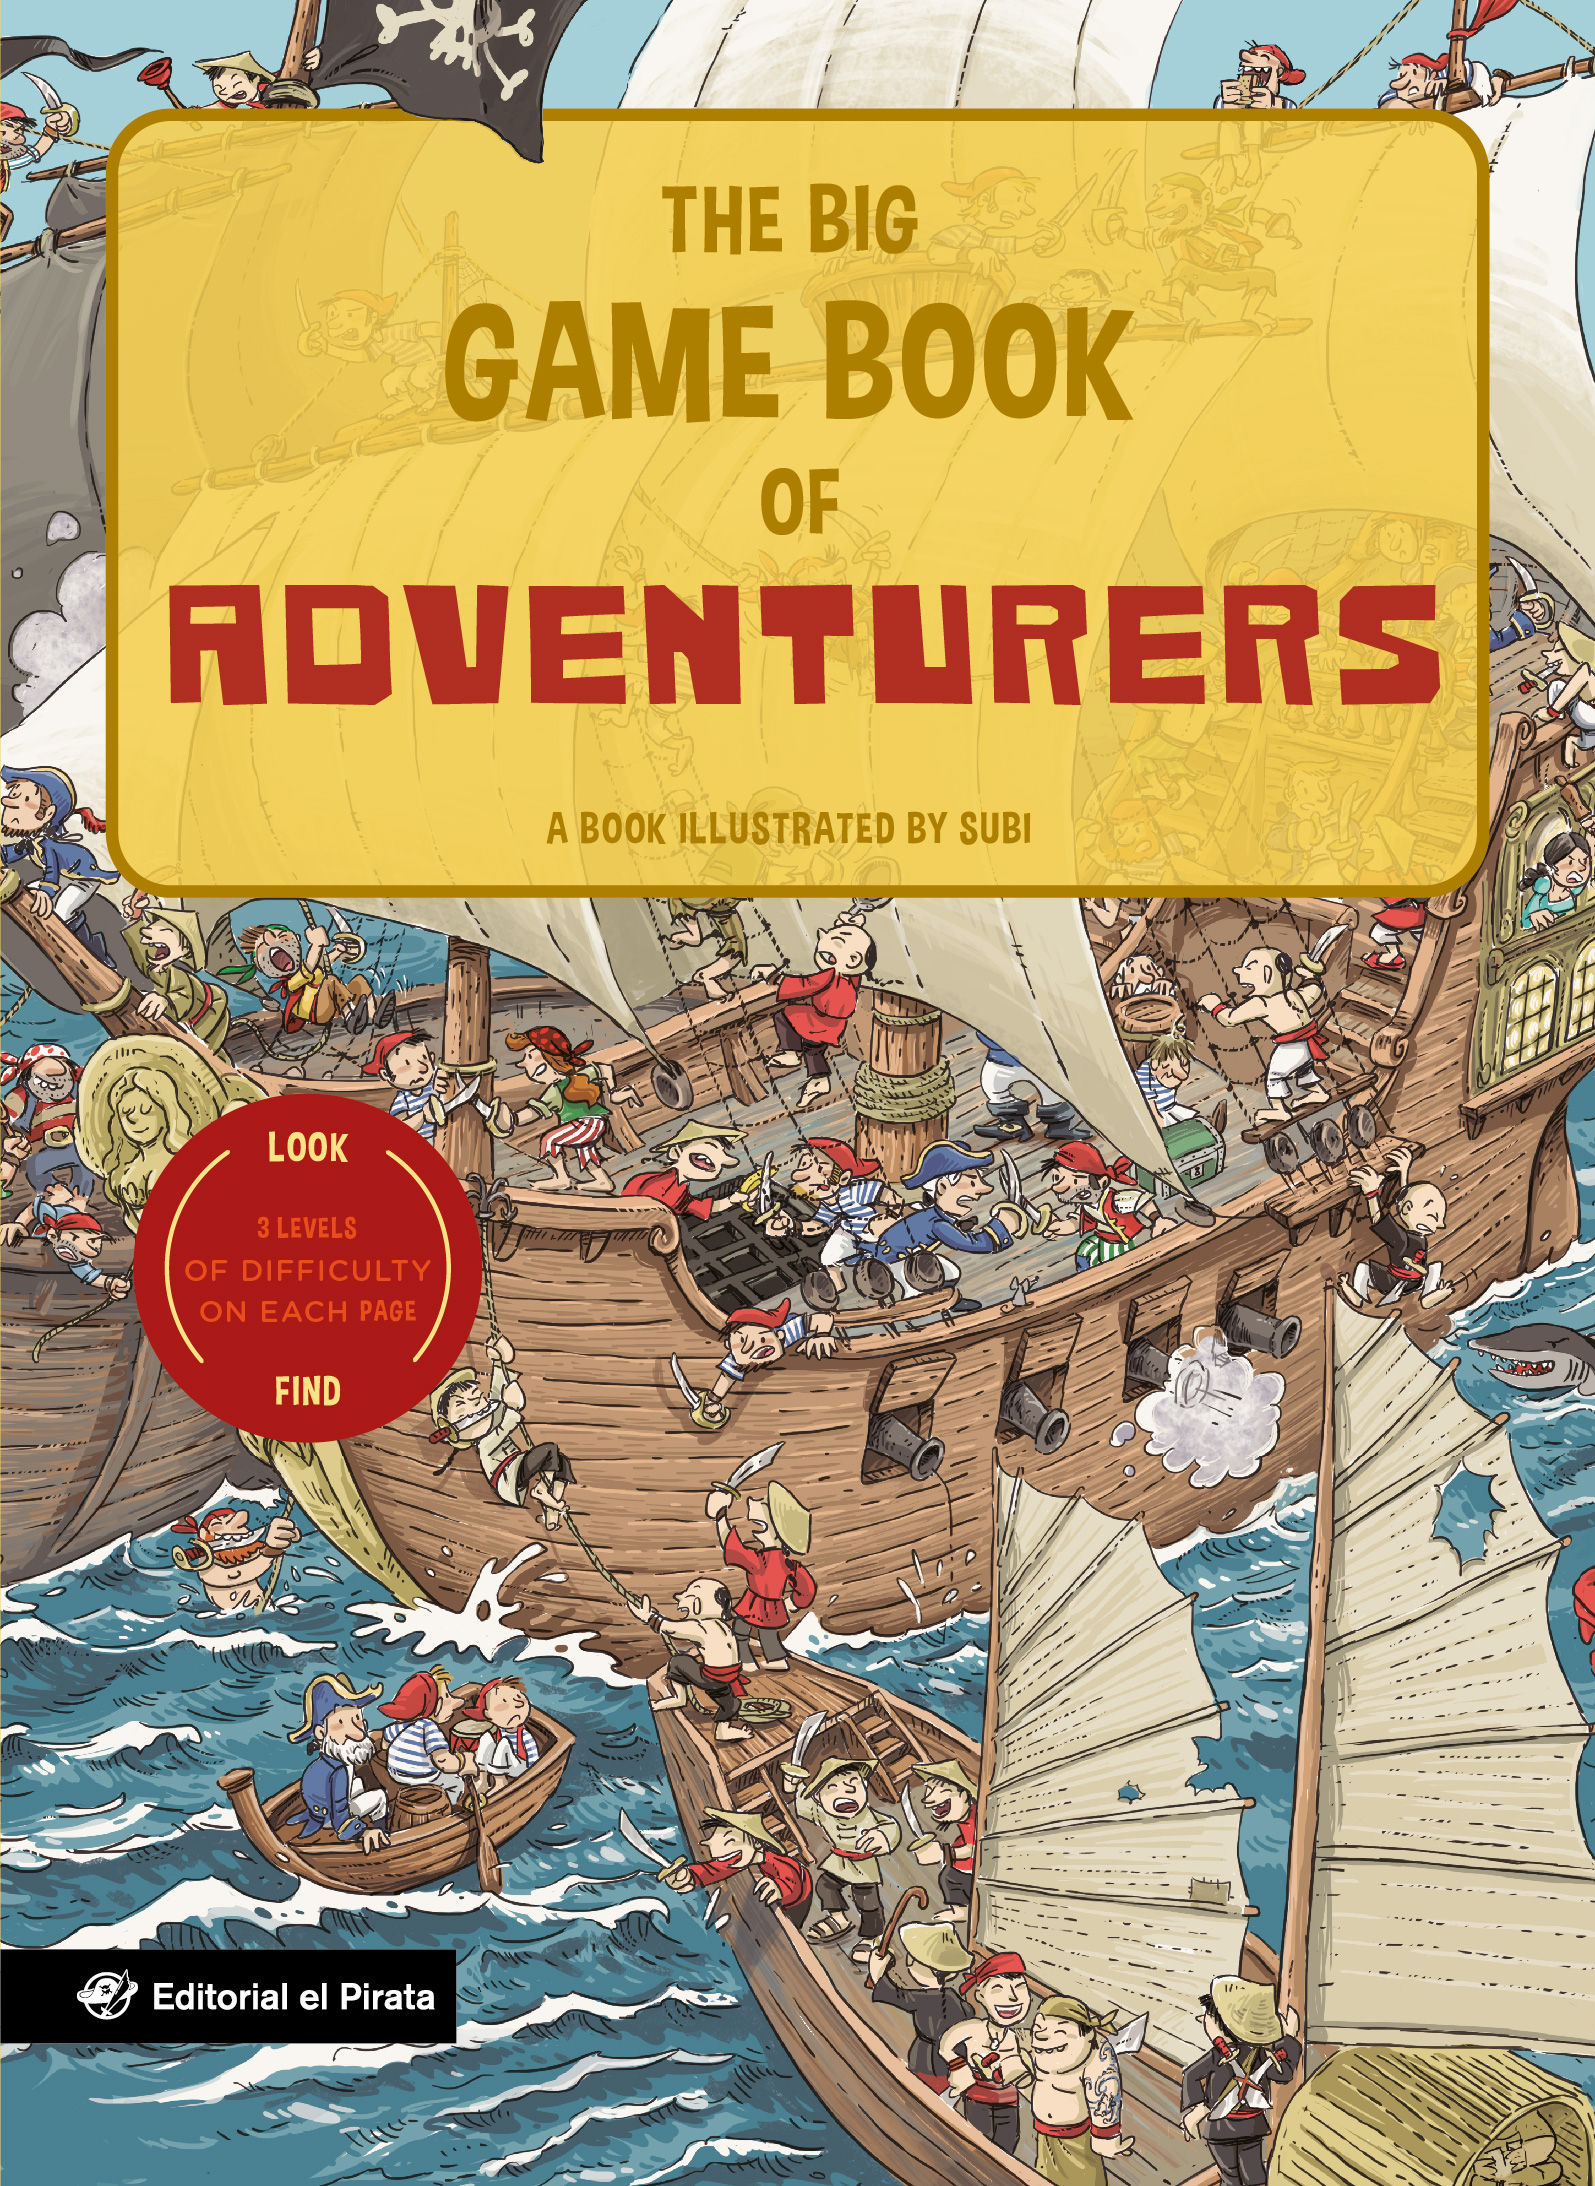 THE BIG GAME BOOK OF ADVENTURERS